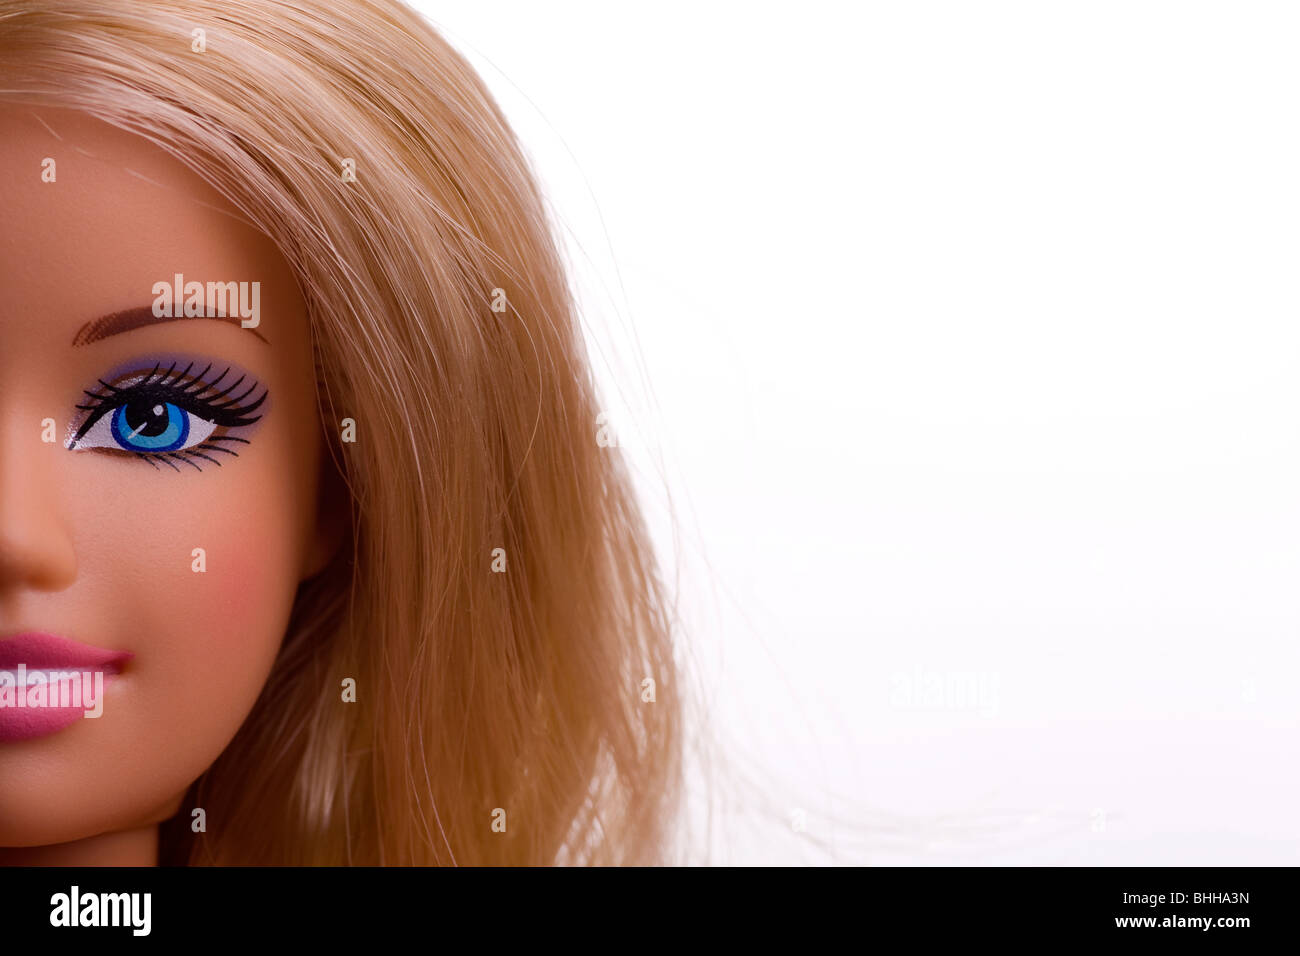 Close-up of a Barbie doll face with blonde hair & blue eyes Stock Photo